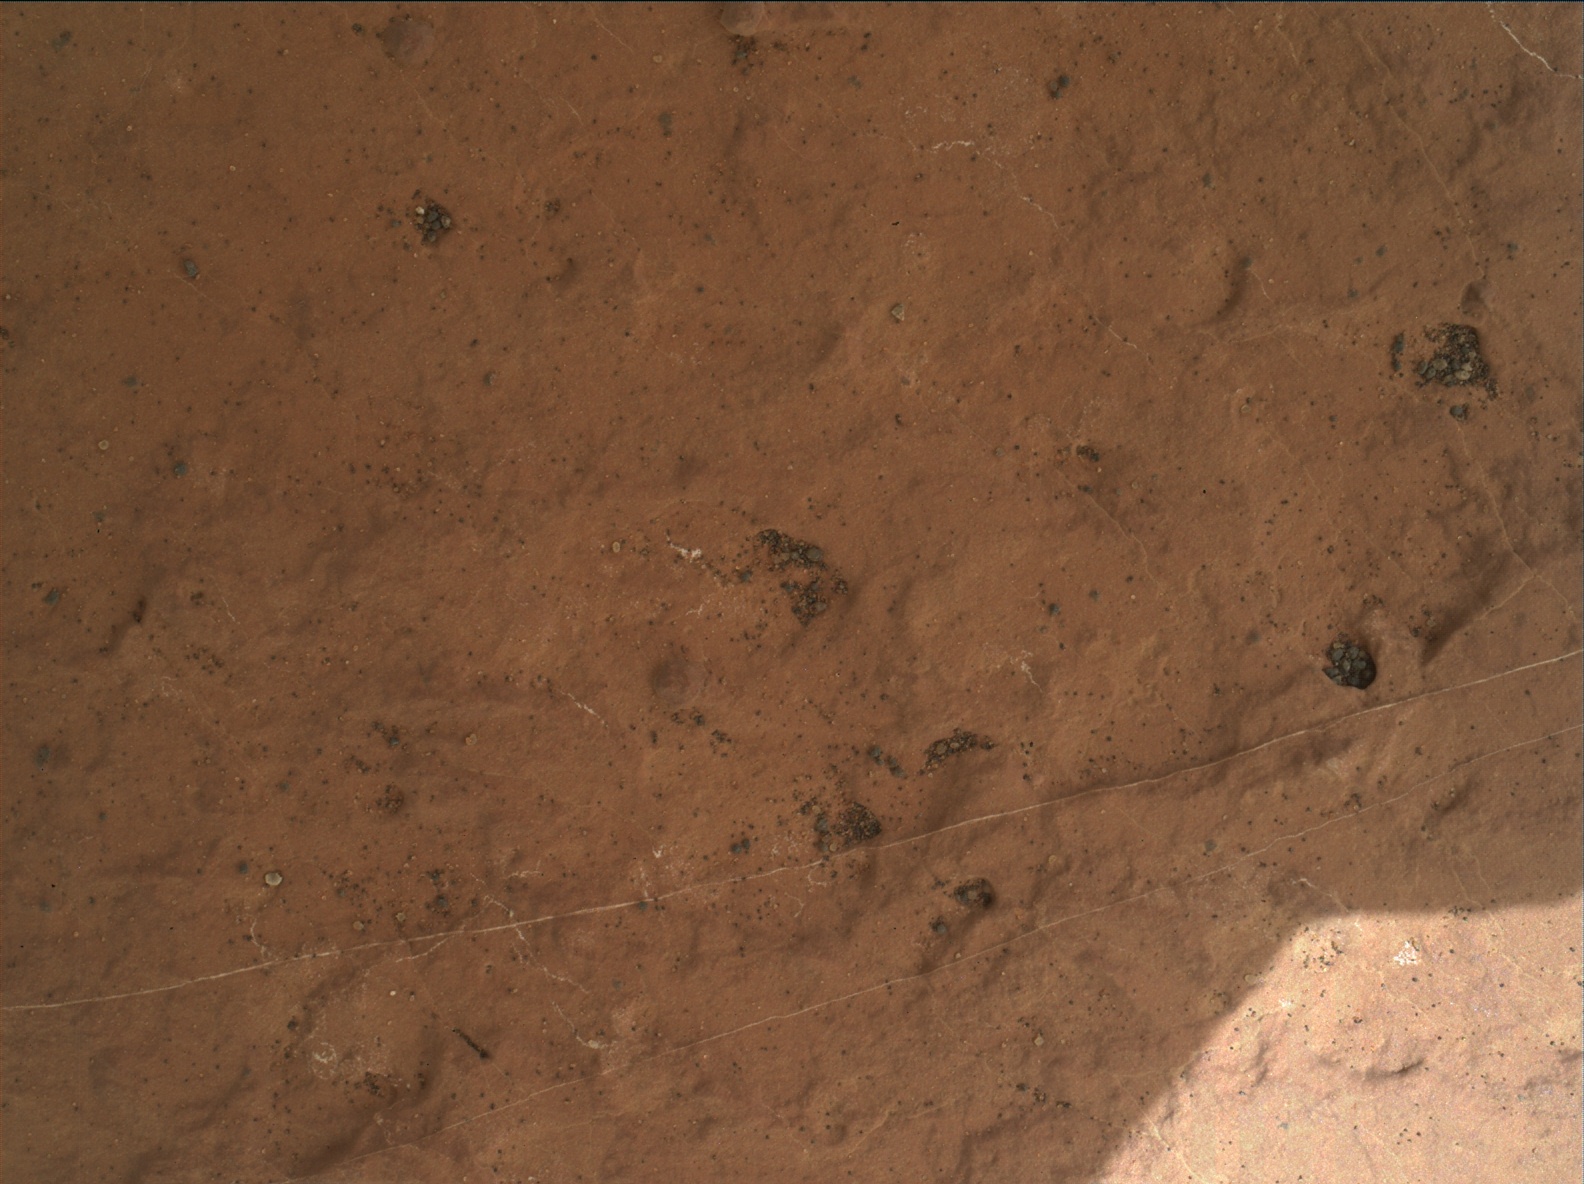 Nasa's Mars rover Curiosity acquired this image using its Mars Hand Lens Imager (MAHLI) on Sol 1591